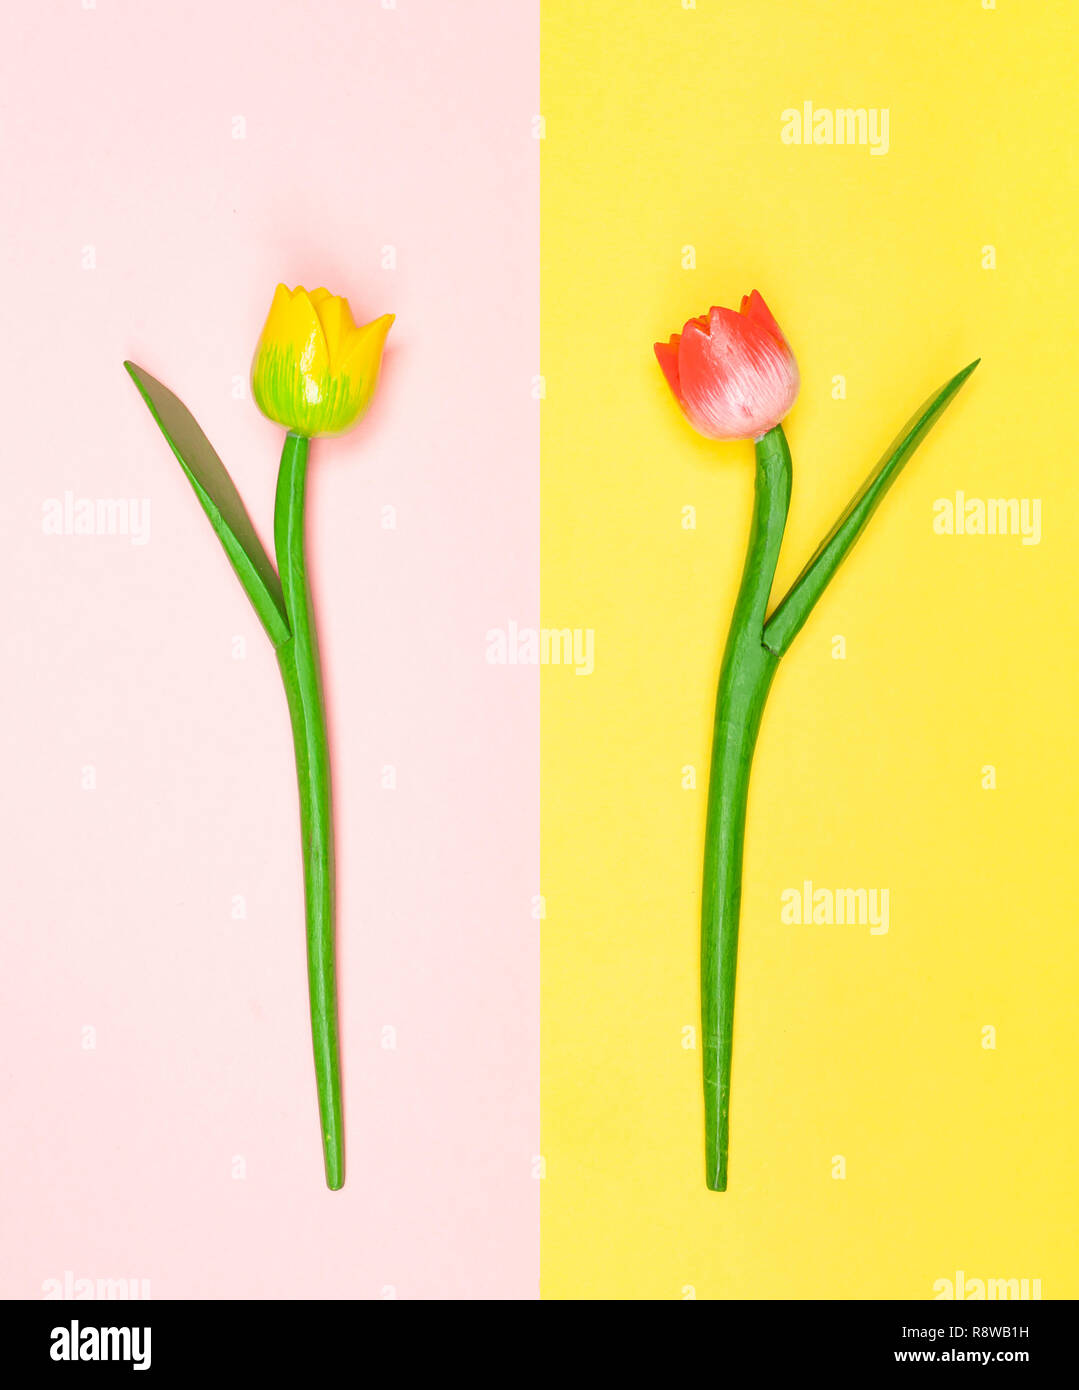 Wooden tulips contrasted with the background color. Flat lay Photography. Stock Photo